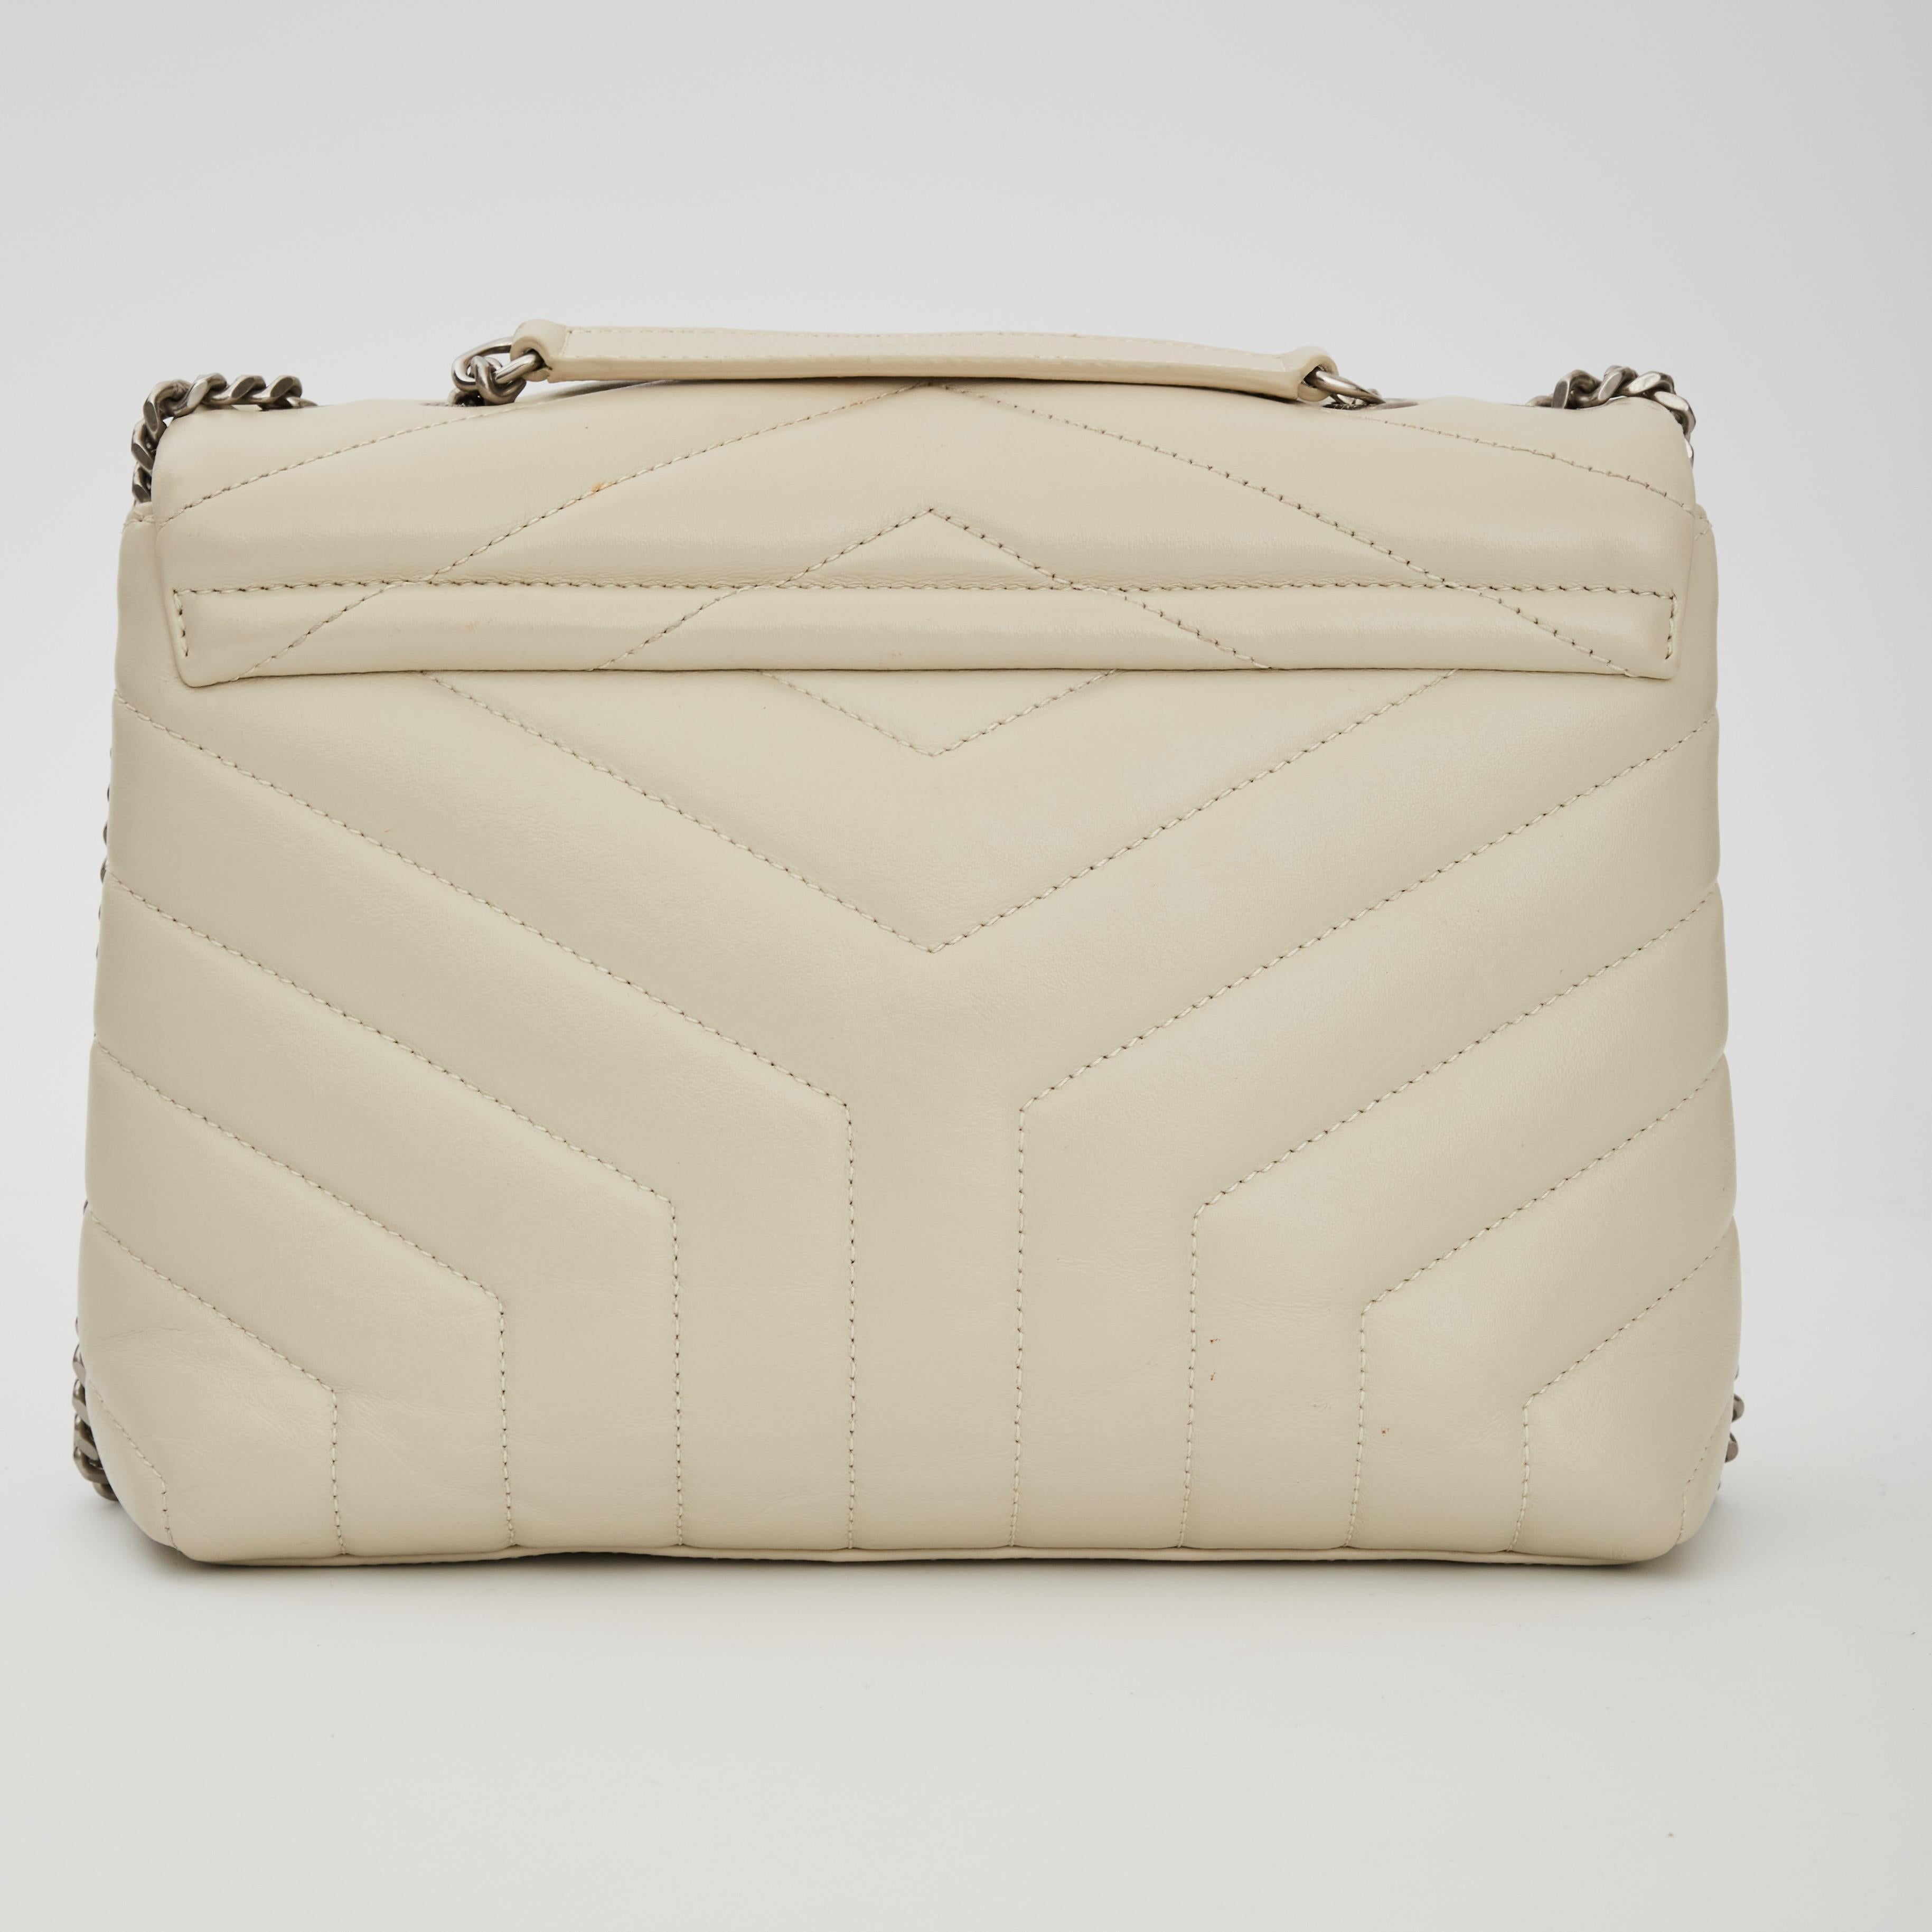 This shoulder bag features chevron quilting at both the front and the back with smooth calfskin leather in beige. The bag features a gold chain link shoulder strap with matching leather shoulder pads. The frontal flap features a prominent gold tone